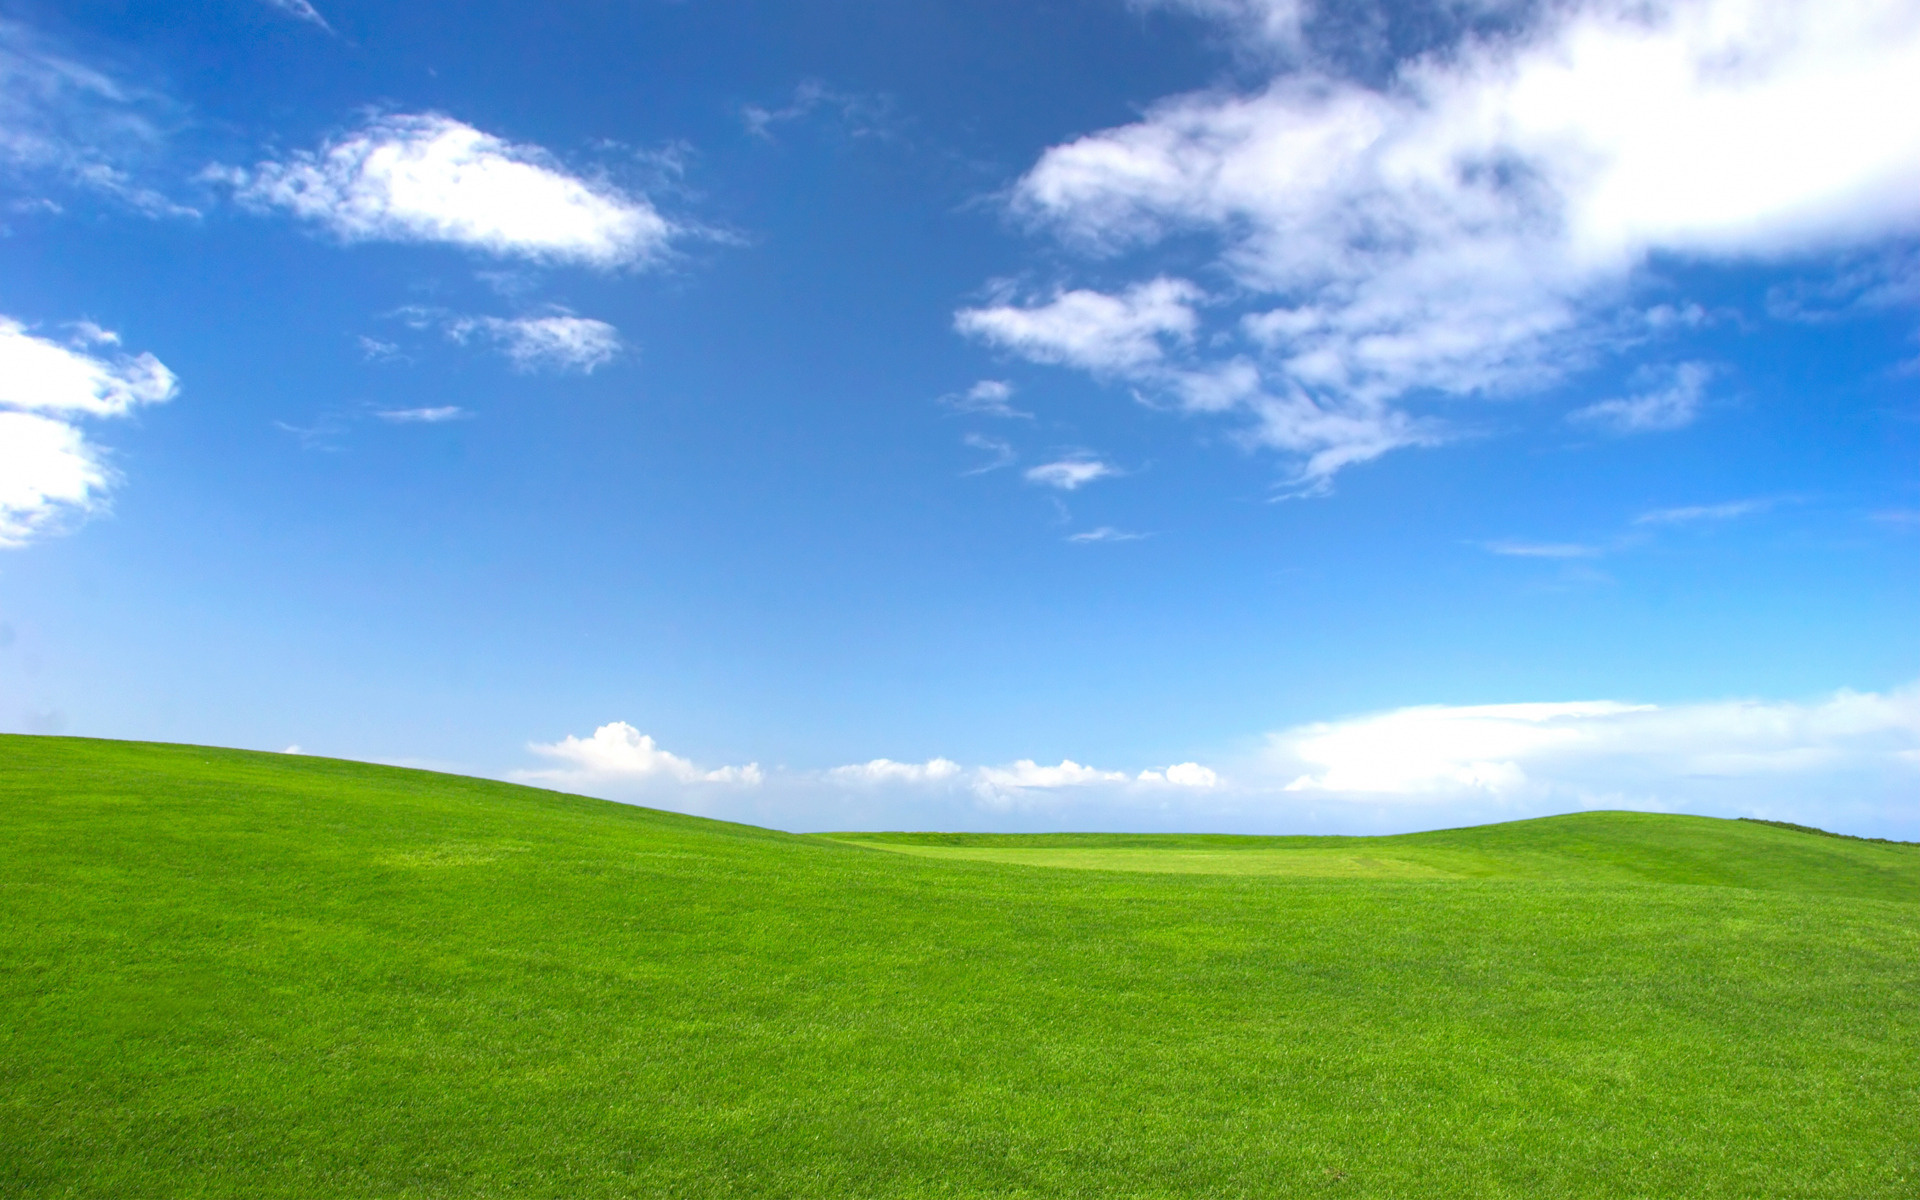 Grass and Sky: Lawn, Feeding herbage, Vegetation, Country park, Green carpet. 1920x1200 HD Wallpaper.